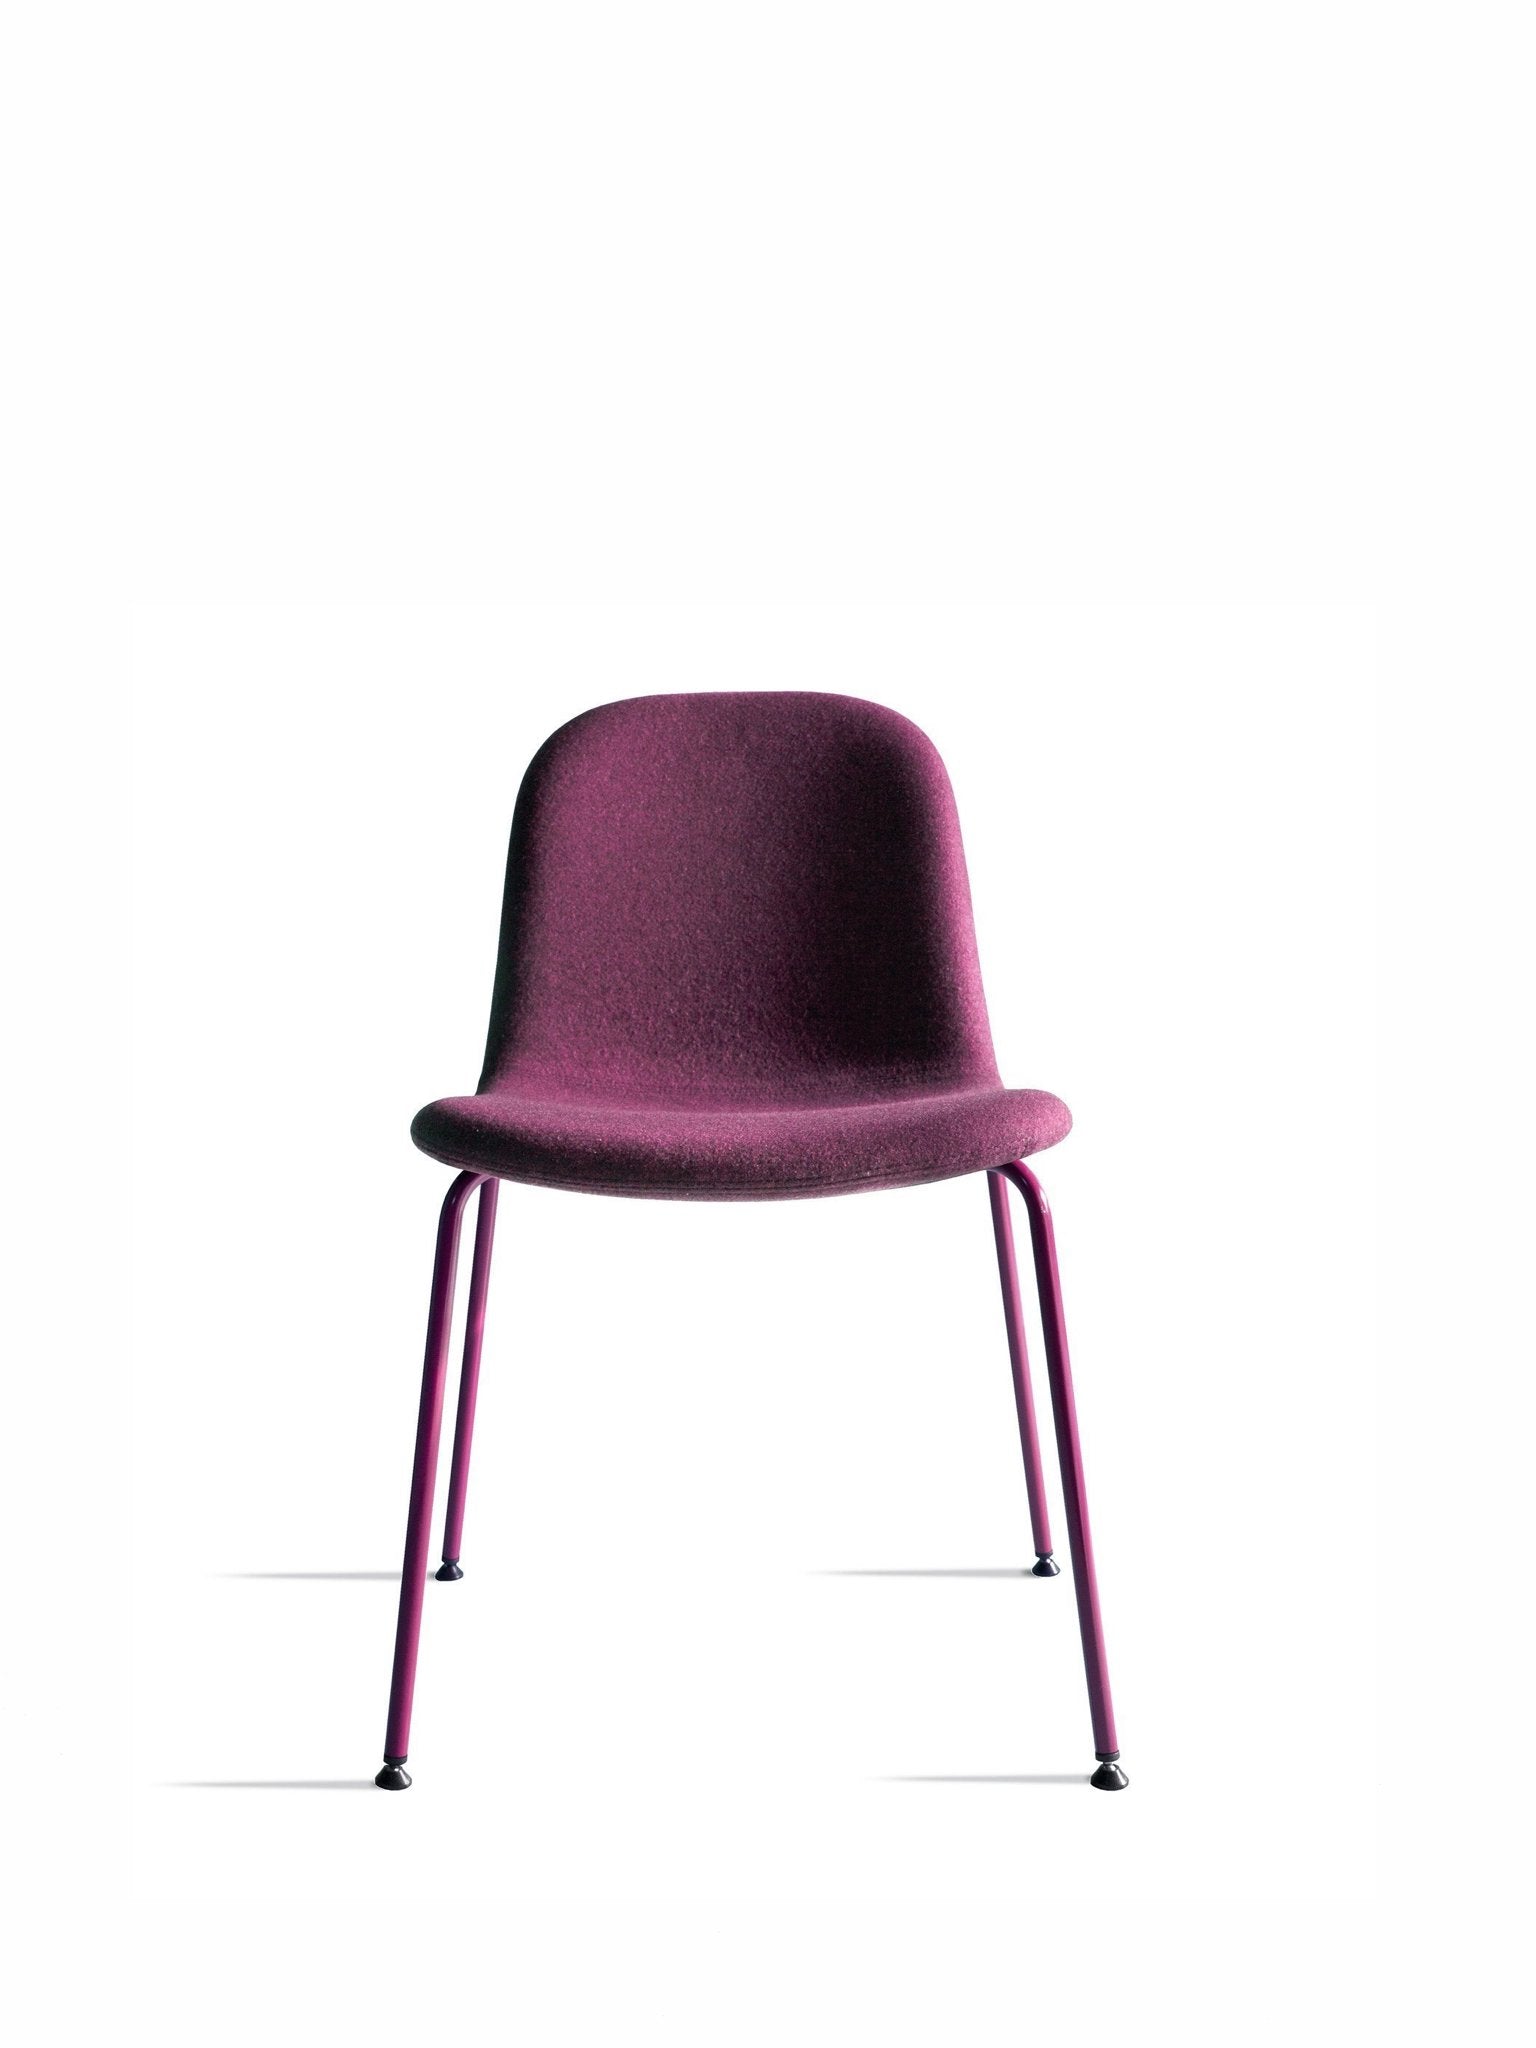 Bacco Slim Side Chair-Job's-Contract Furniture Store